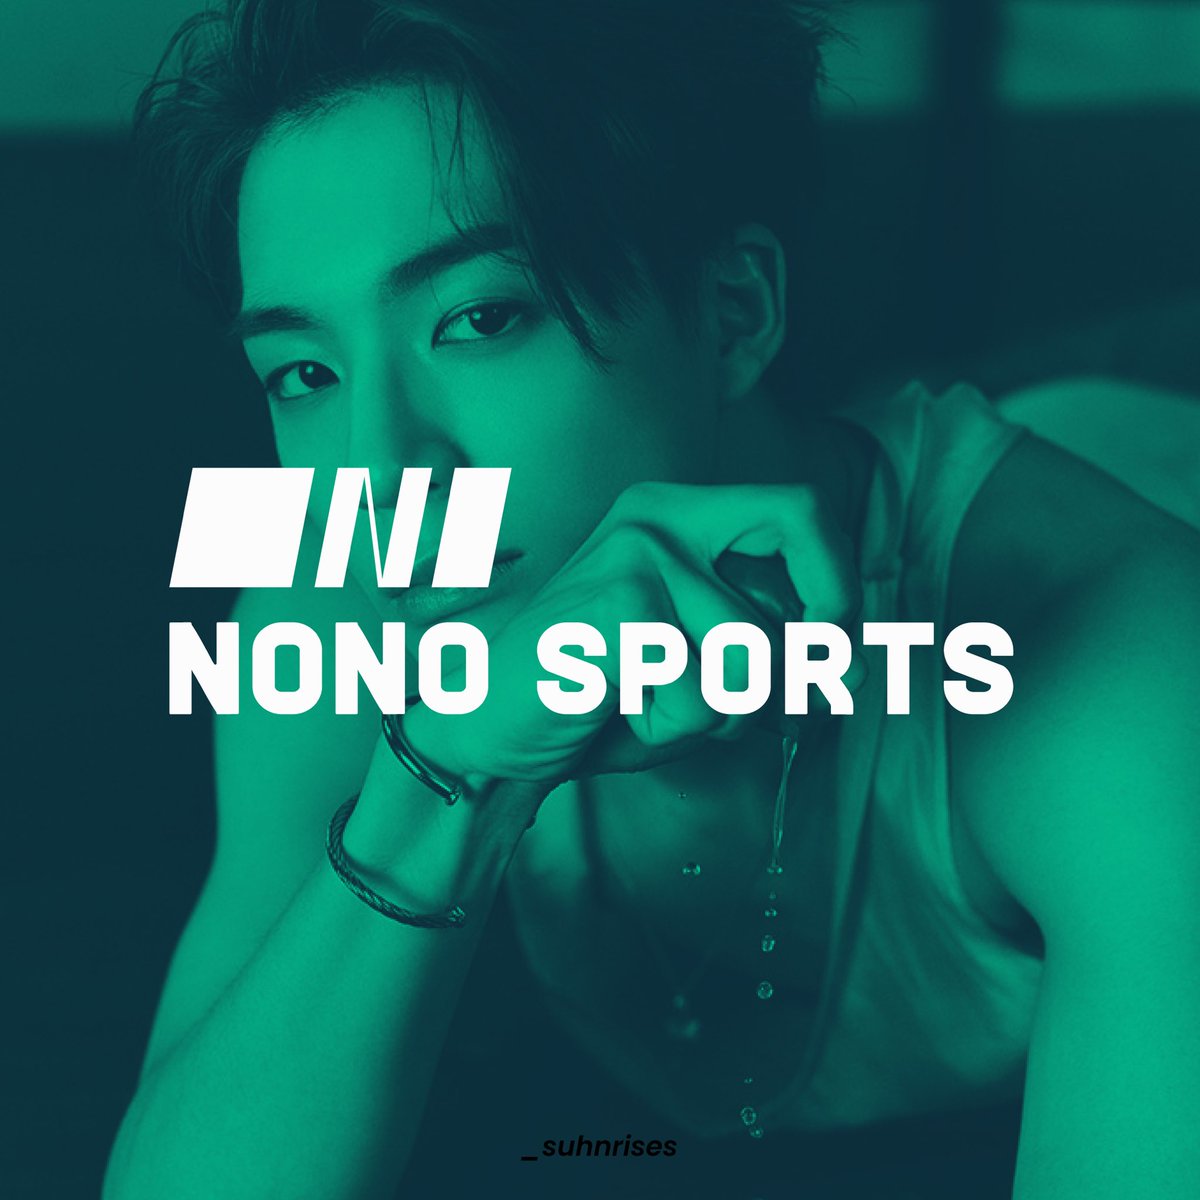 jeno: nono sports- sportswear brand bc jeno v sporty and excitable - called nono bc 1) no sports bc i don’t exercise hshdjsh and 2) nono is a nickname that cfans gave jeno and it’s so cute i love it - makes super comfy + brightly coloured sweats and hoodies